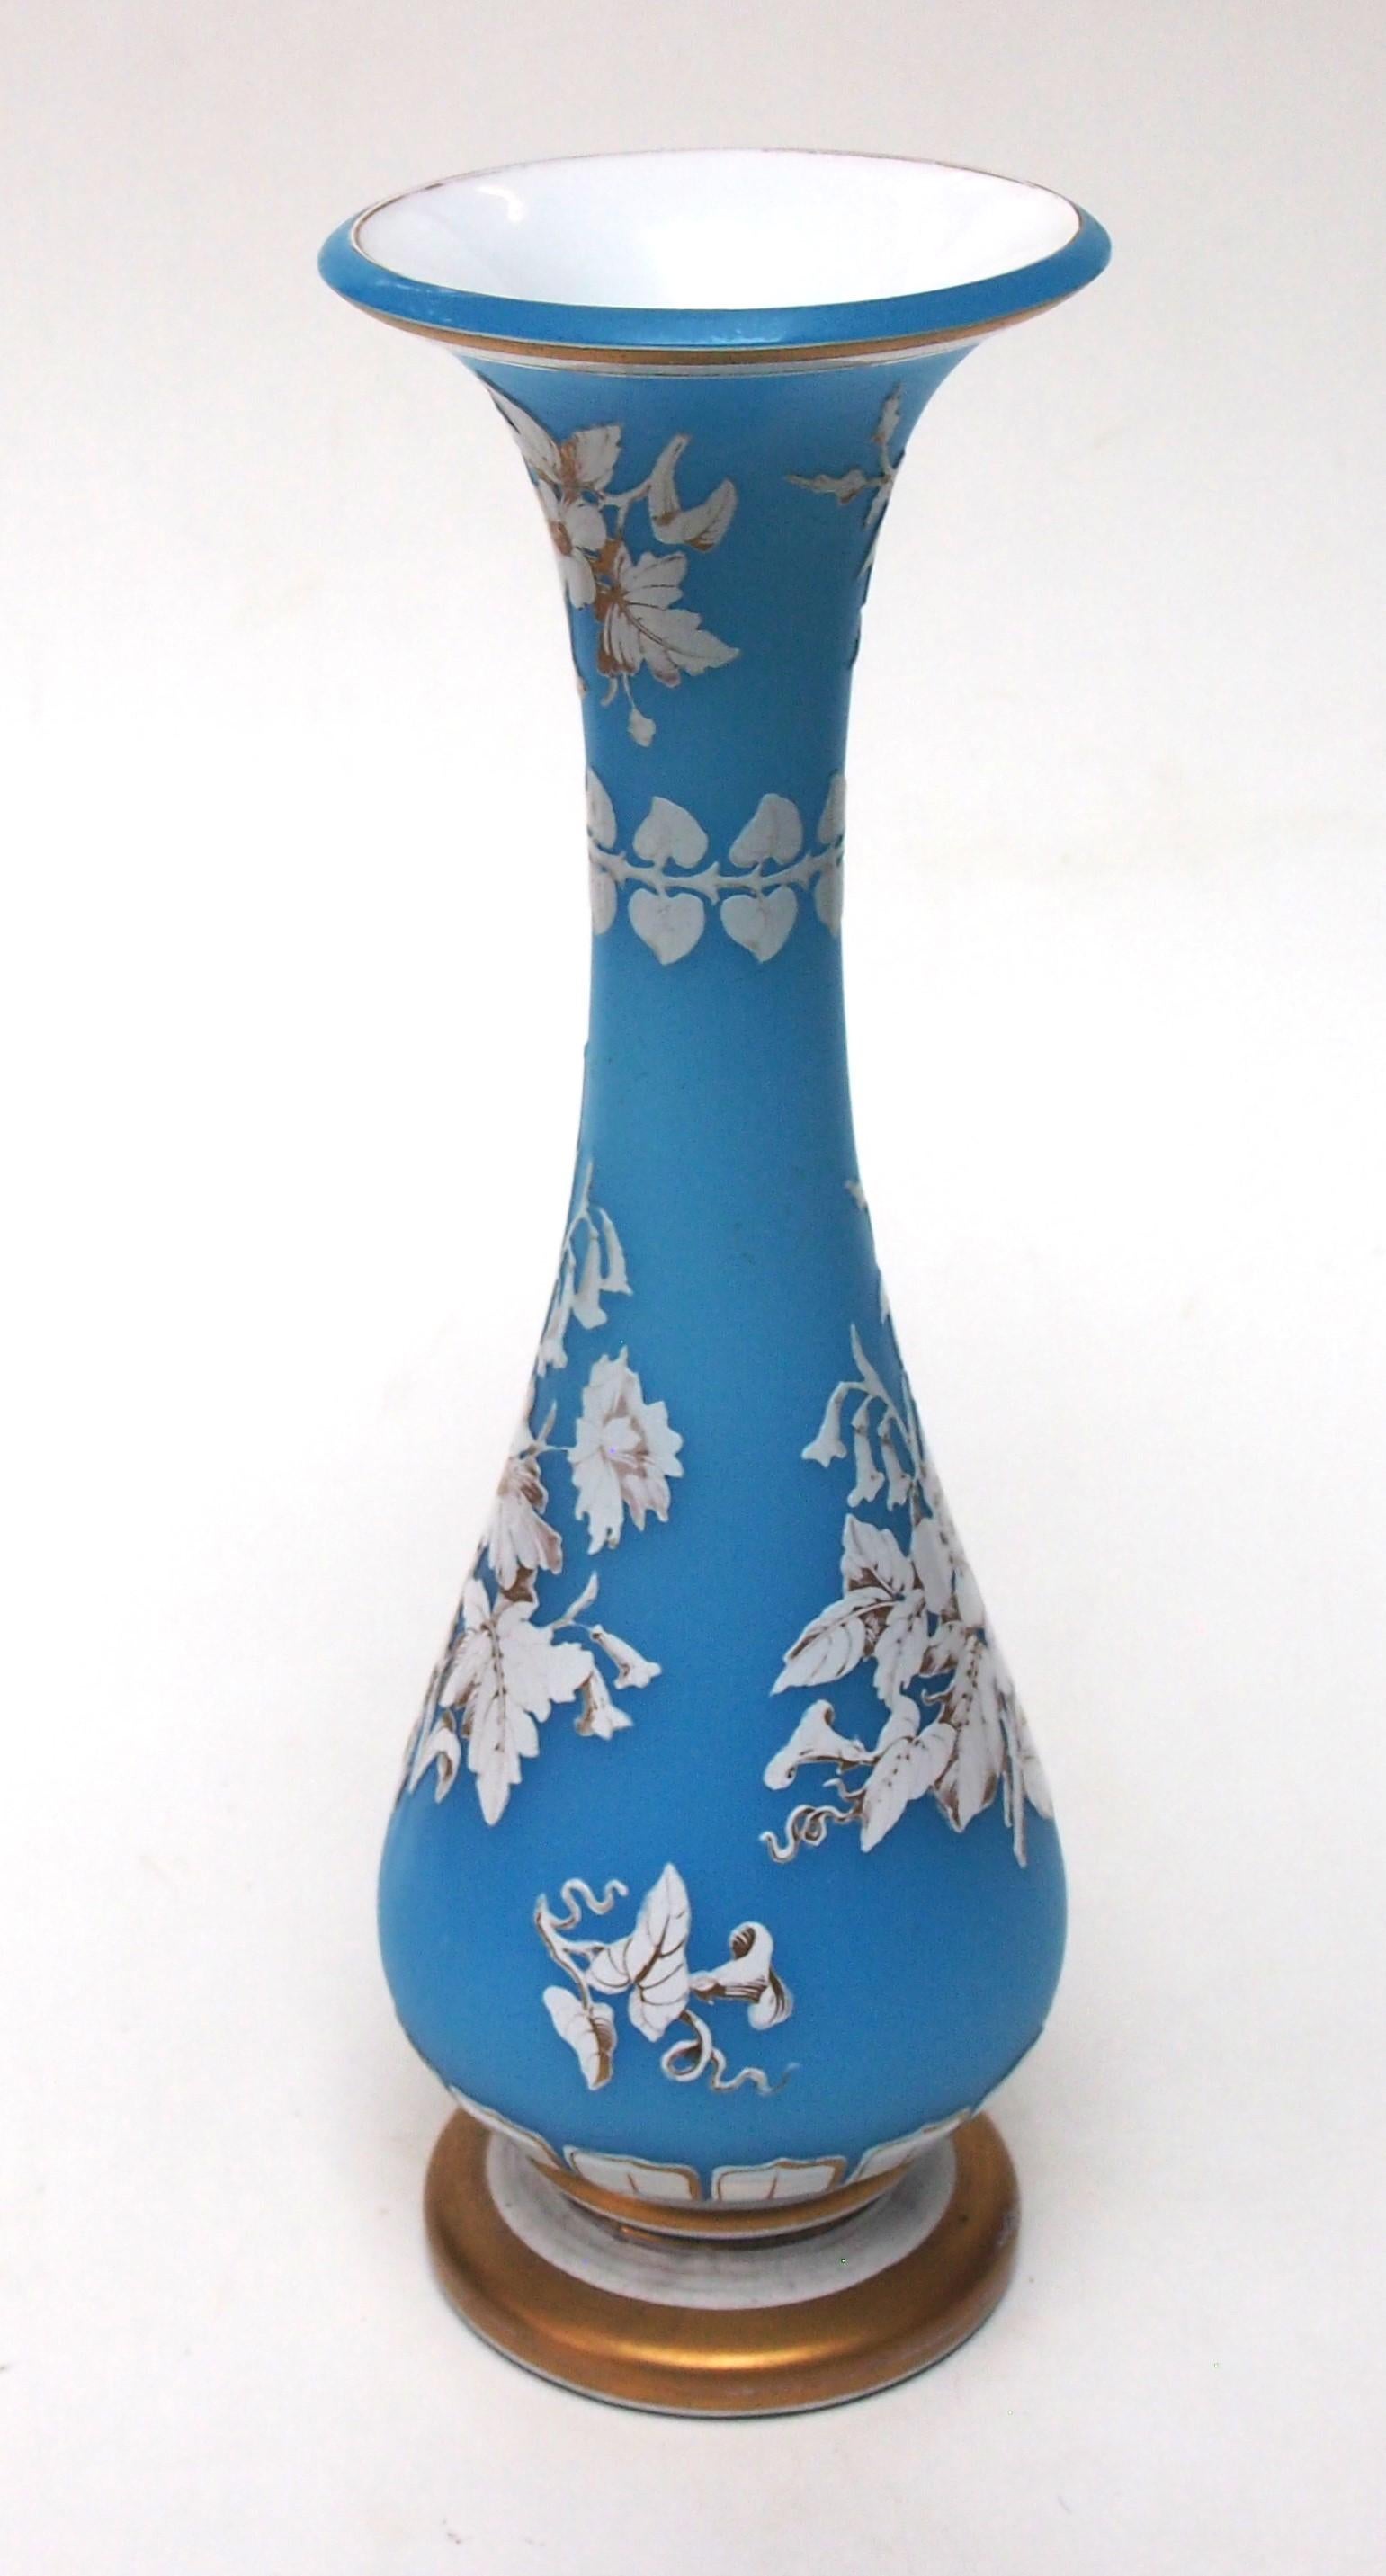 A rare early Victorian Harrach cameo vase in blue, cased on both sides with opaque white, and cut to blue on the outside to reveal a stylised decoration and a floral/botanical scene -highlighted in gilding. Generally Cameos were considered to have